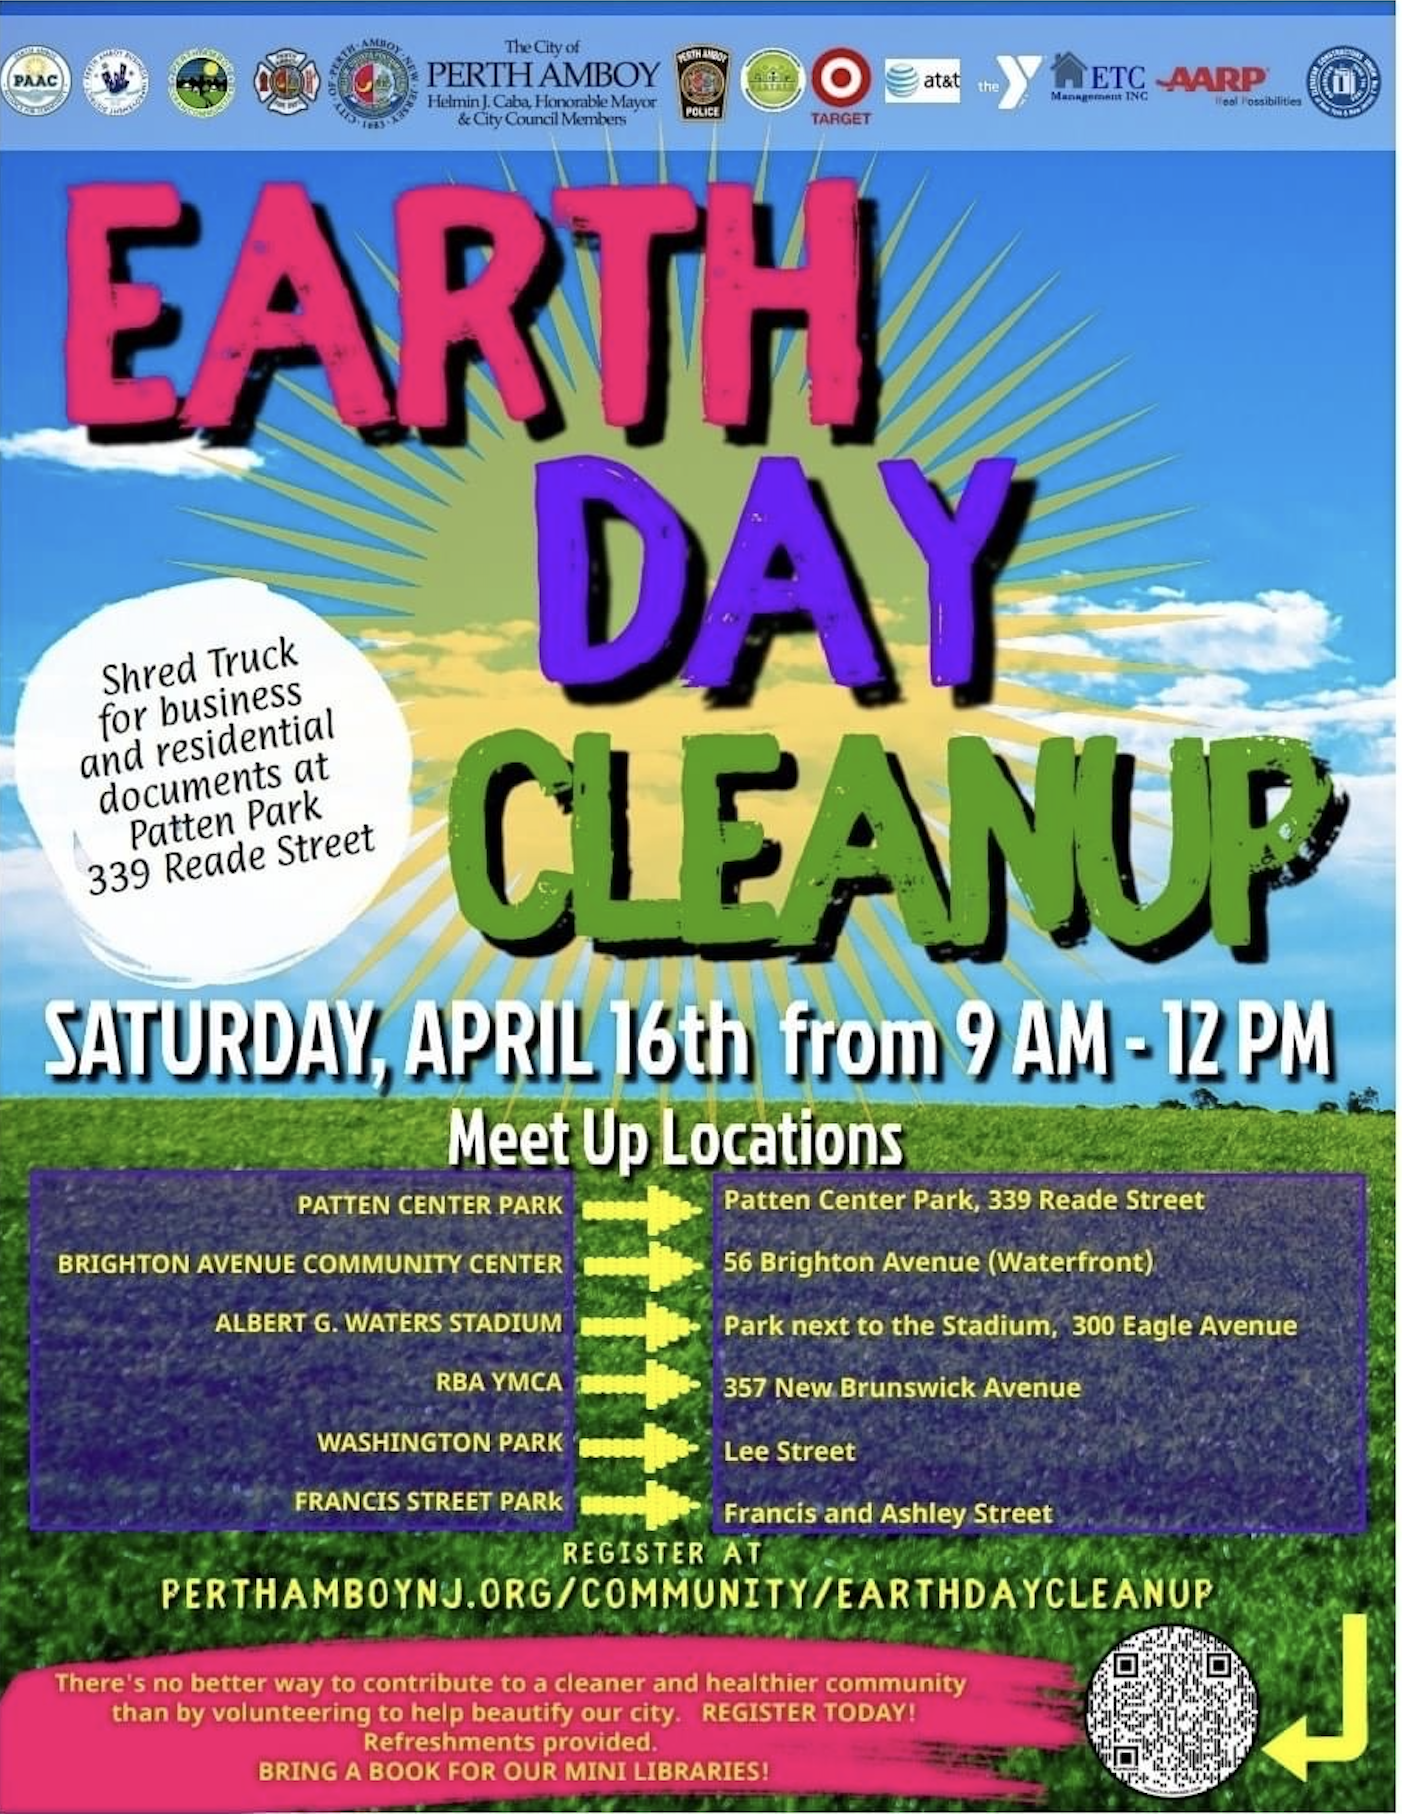 Perth Amboy Earth Day Clean Up